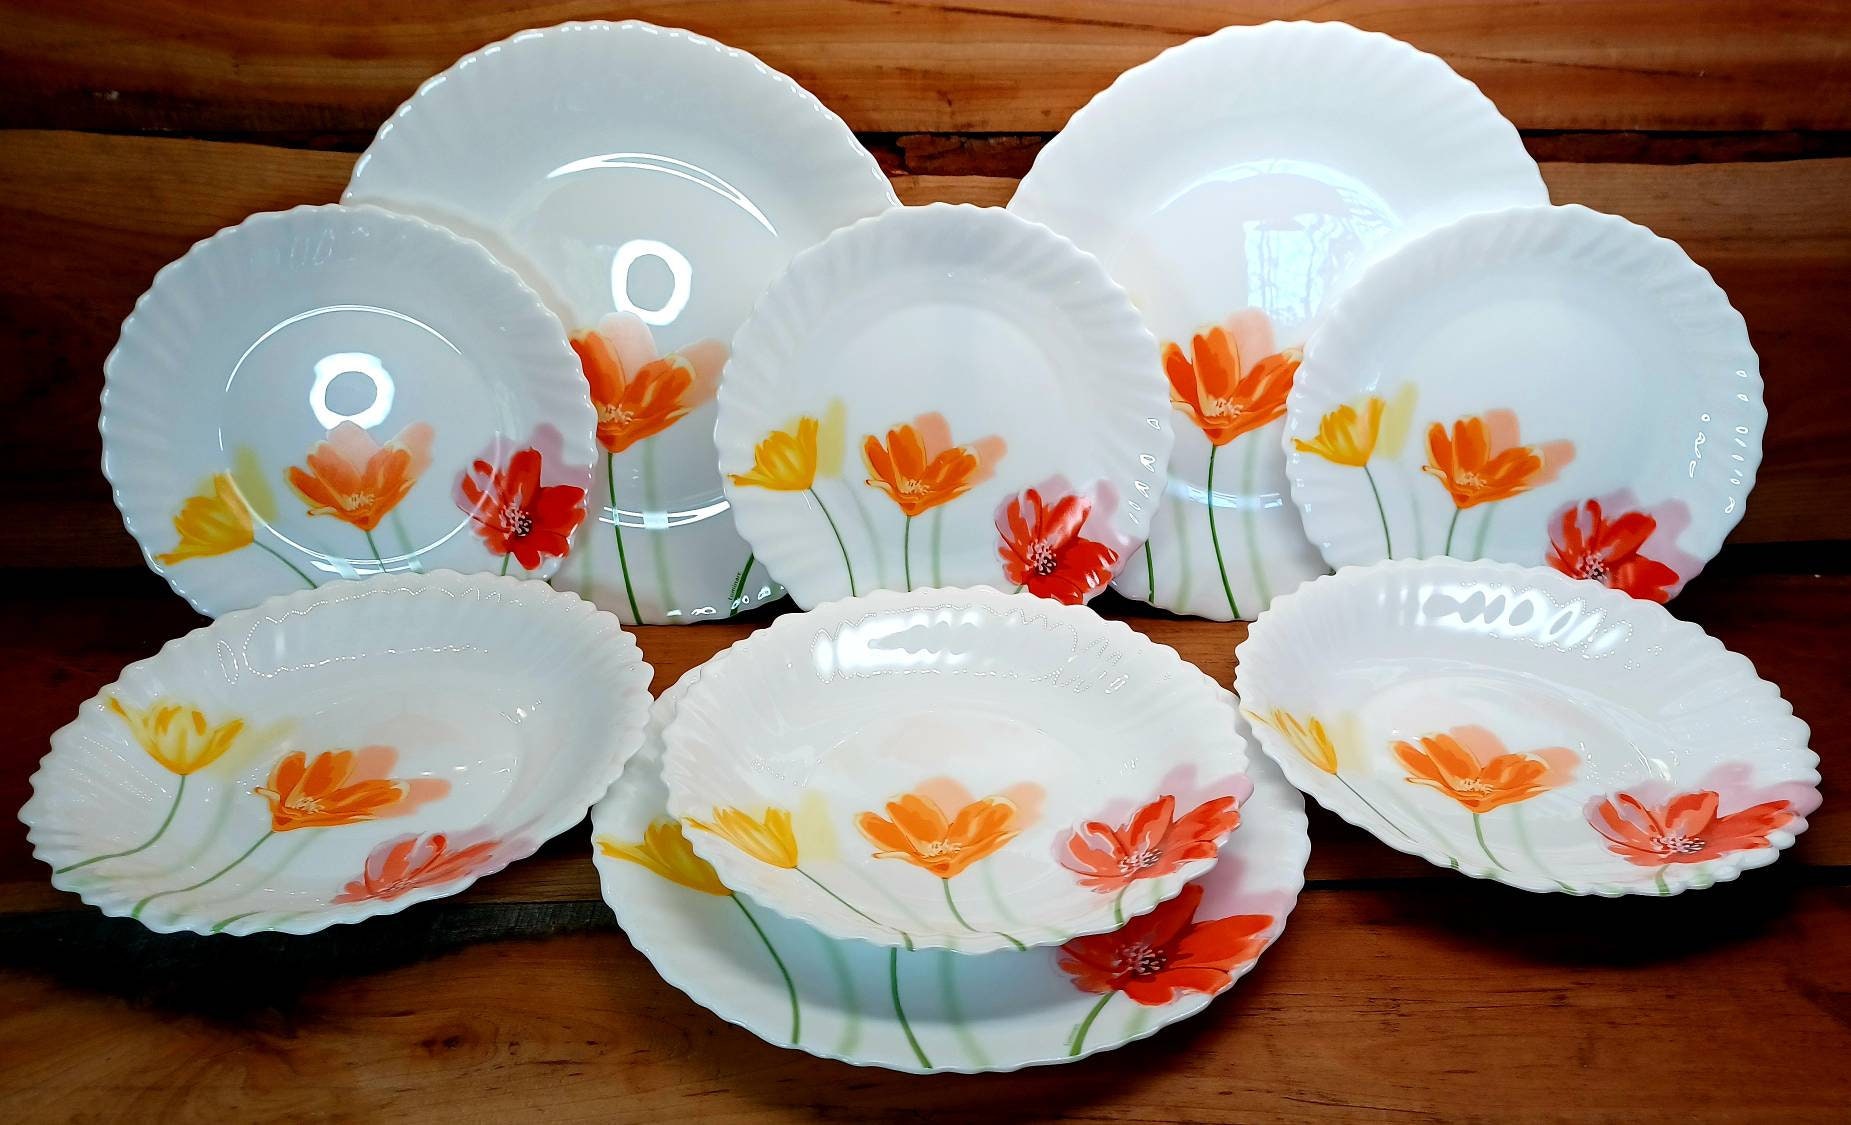 Luminarc France Floral Dinnerware Made in France Dinnerware Luminarc Floral  Dinner Plates Luminarc Soup Bowls Luminarc France Dinnerware - Etsy